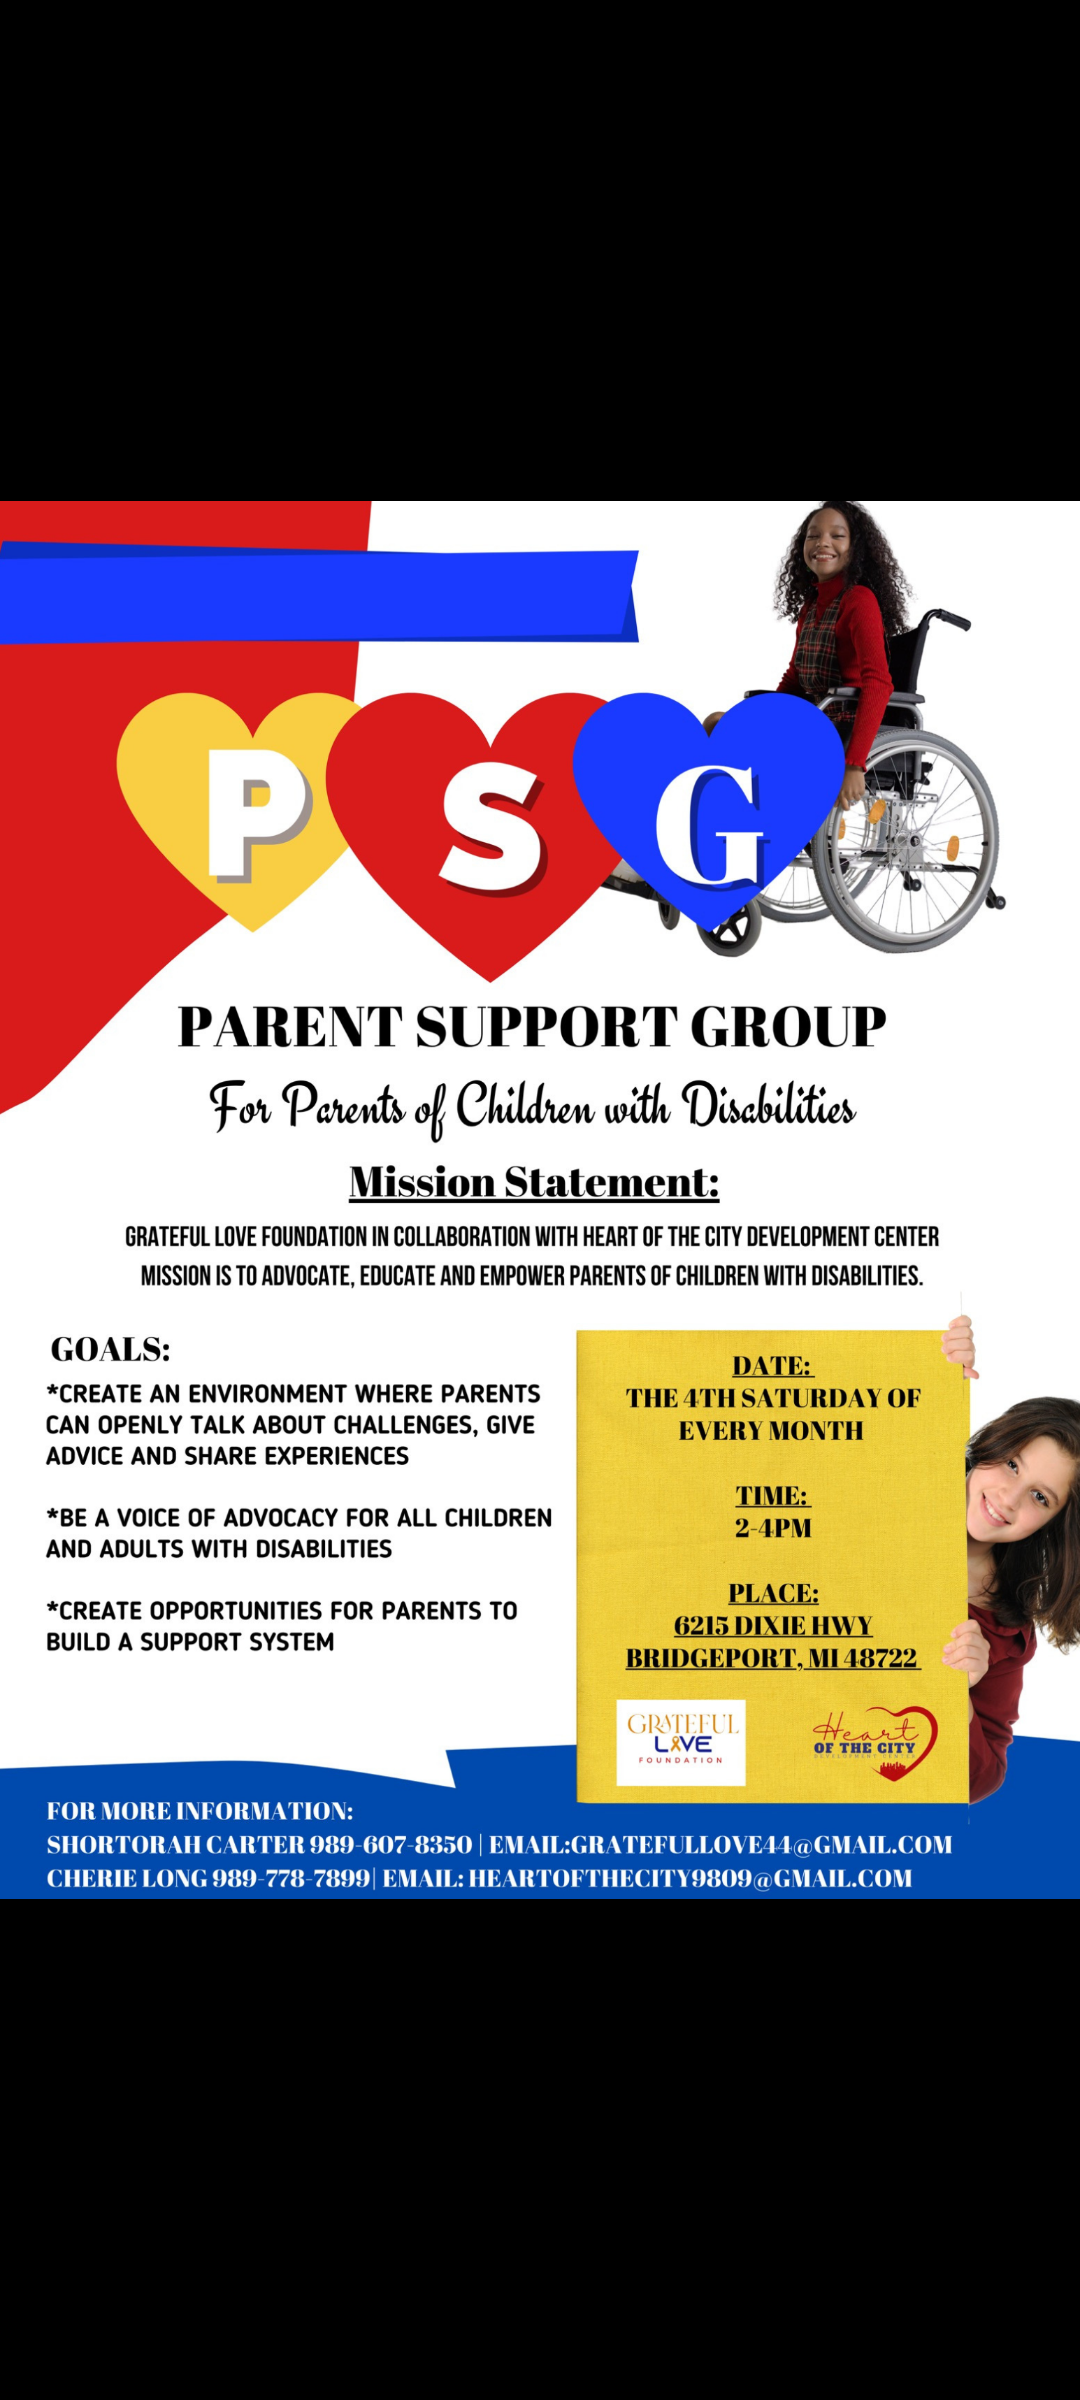 <h1 class="tribe-events-single-event-title">PARENT SUPPORT GROUP – For Parents of Children with disabilities.</h1>